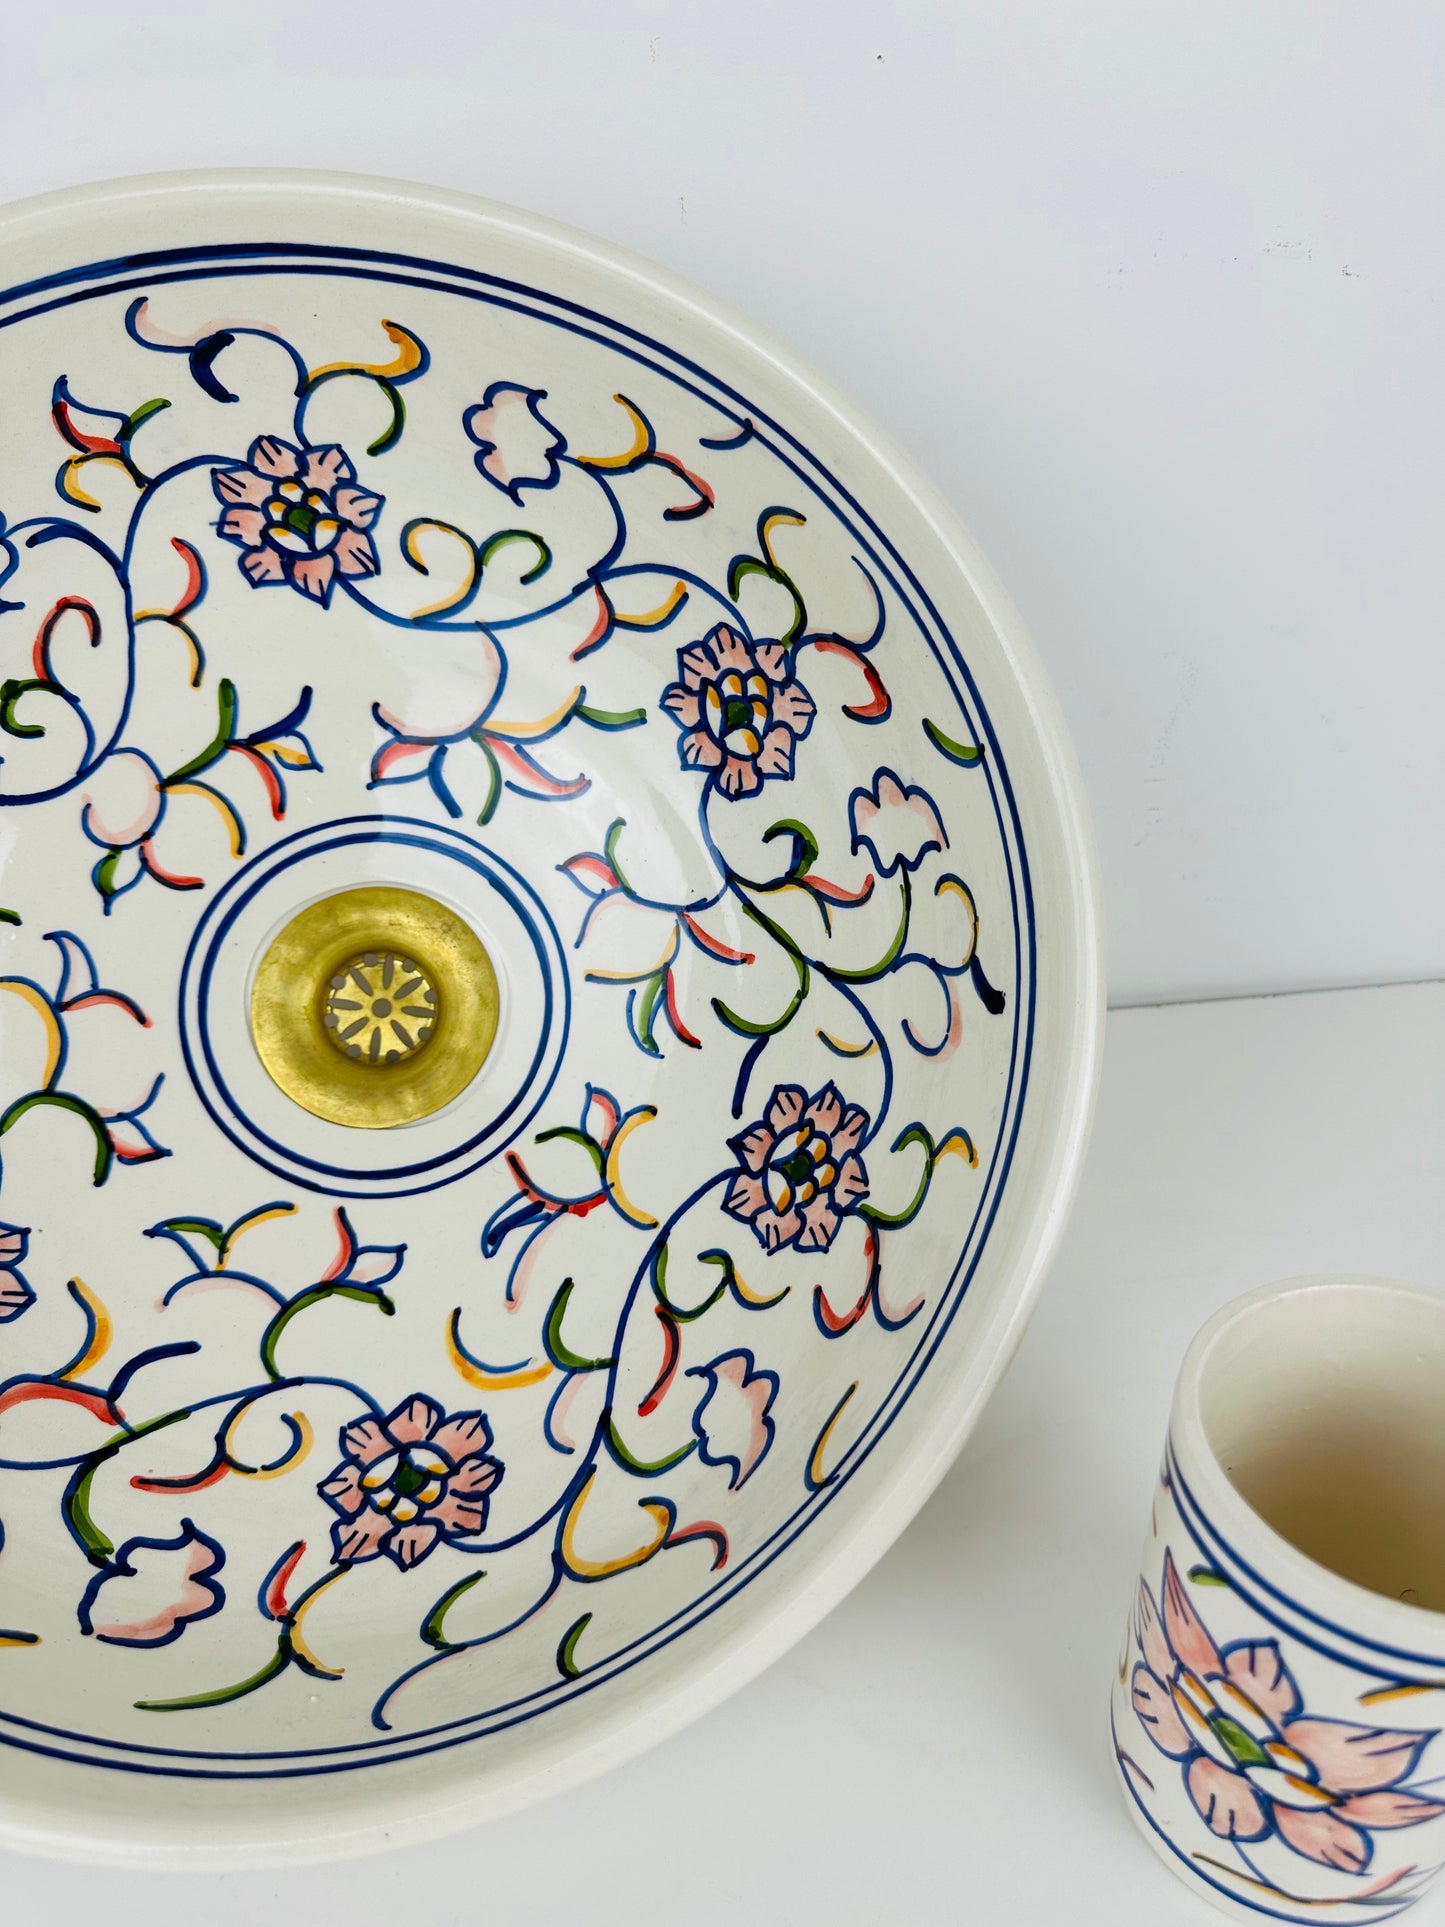 Blooming Garden Delight: Handcrafted Ceramic Sink with Colorful Floral Design